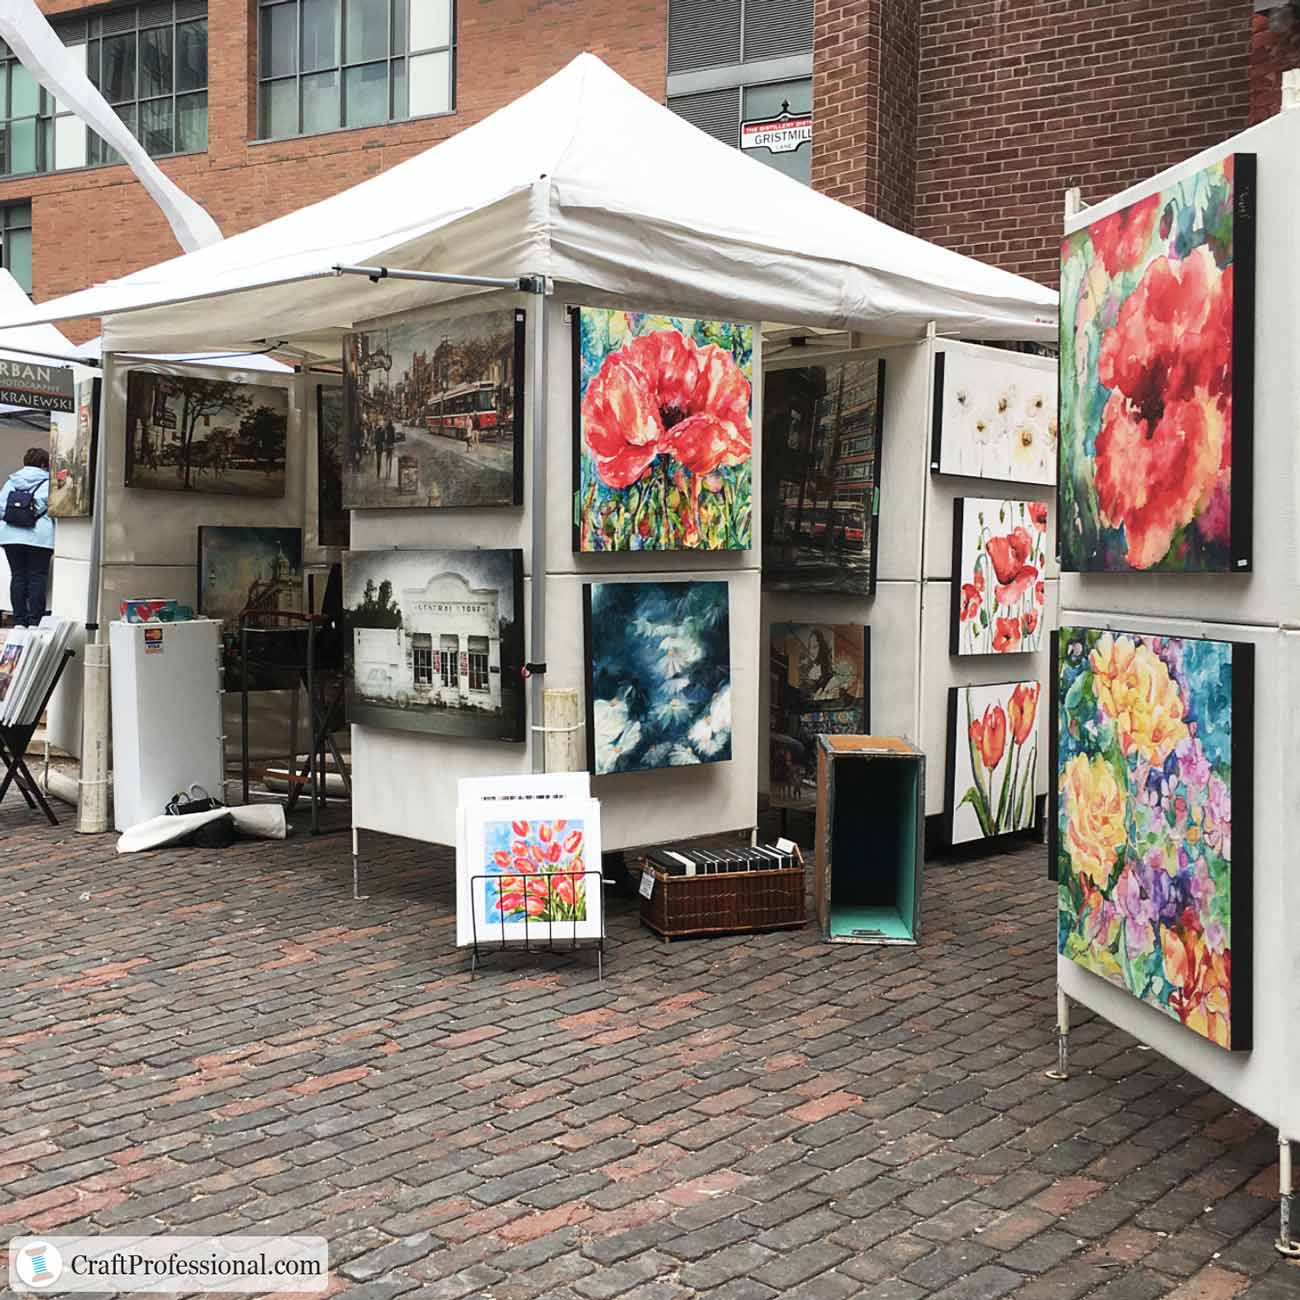 Outdoors art display with tent - farmers markets and events art setup 